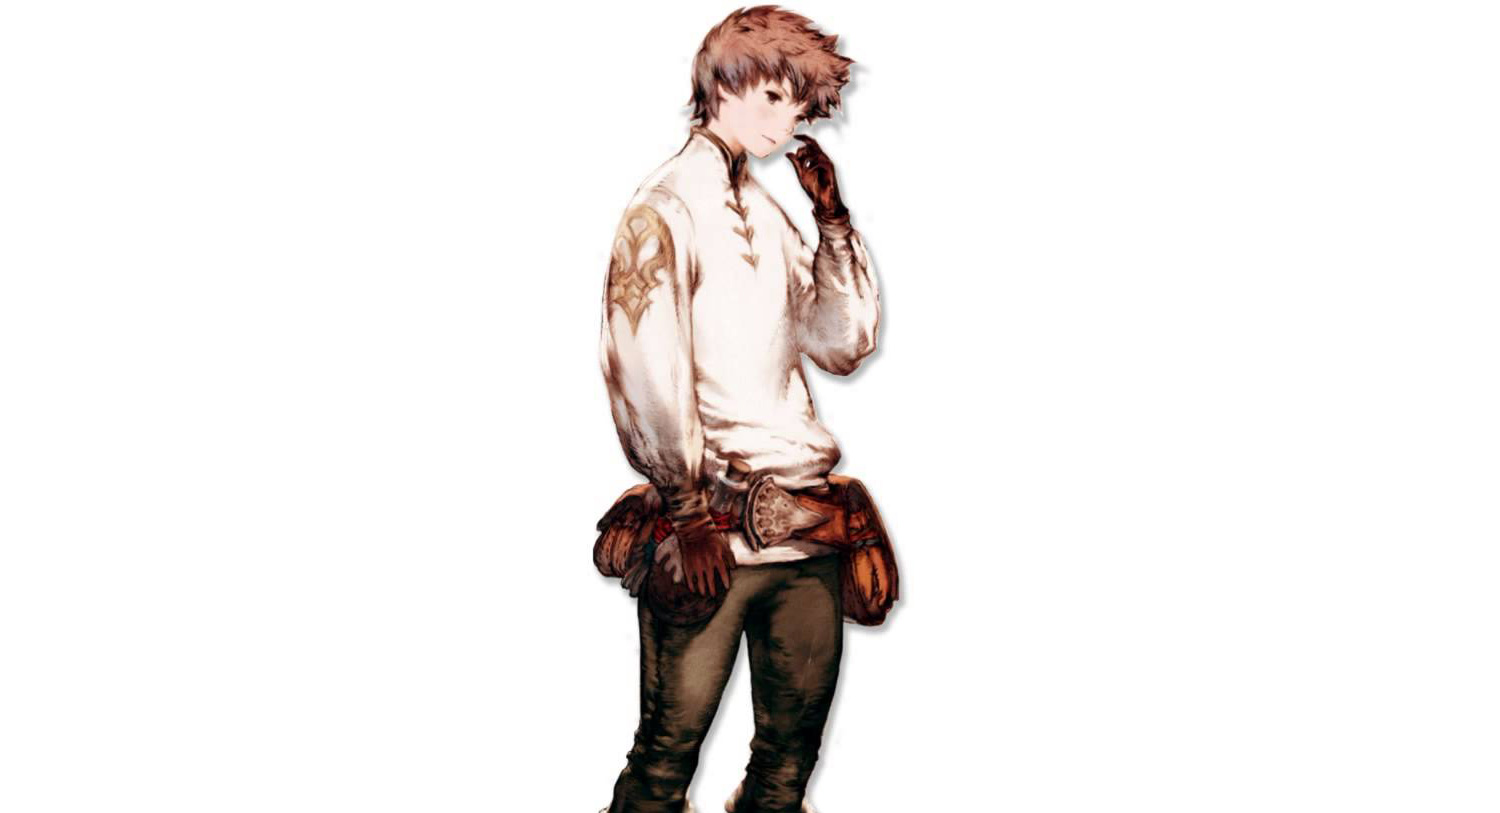 Tiz Arrior - Characters - Introduction, Bravely Second: End Layer